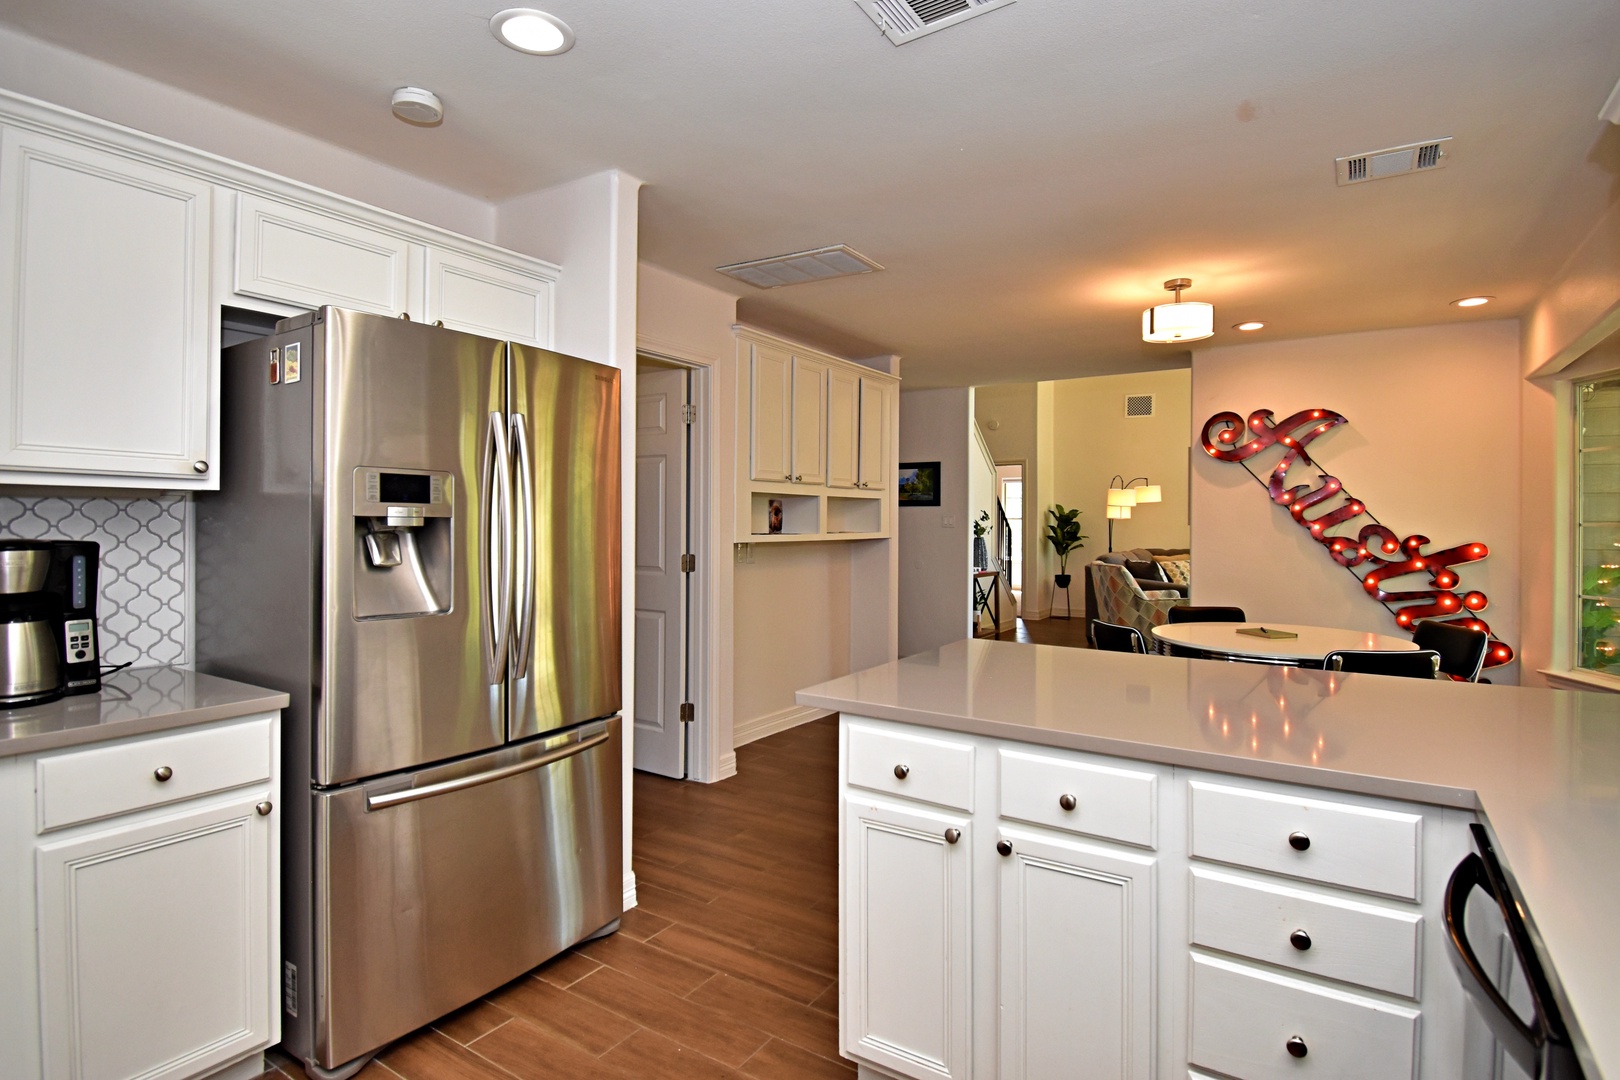 The chic kitchen offers ample space & all the comforts of home